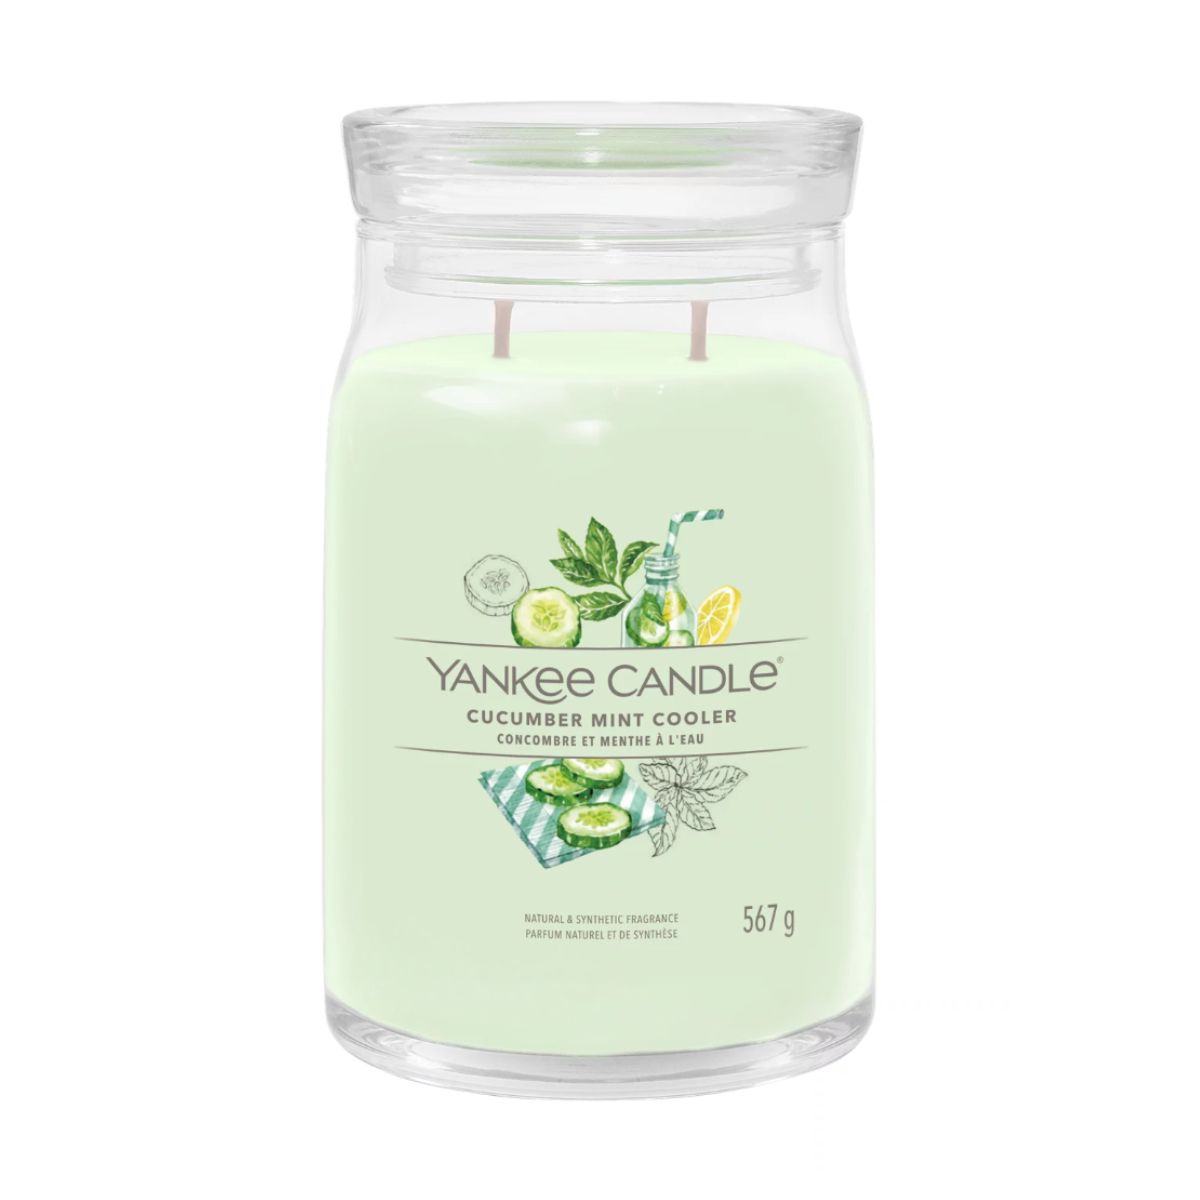 Candle Cucumber Mint Cooler Yankee Candle